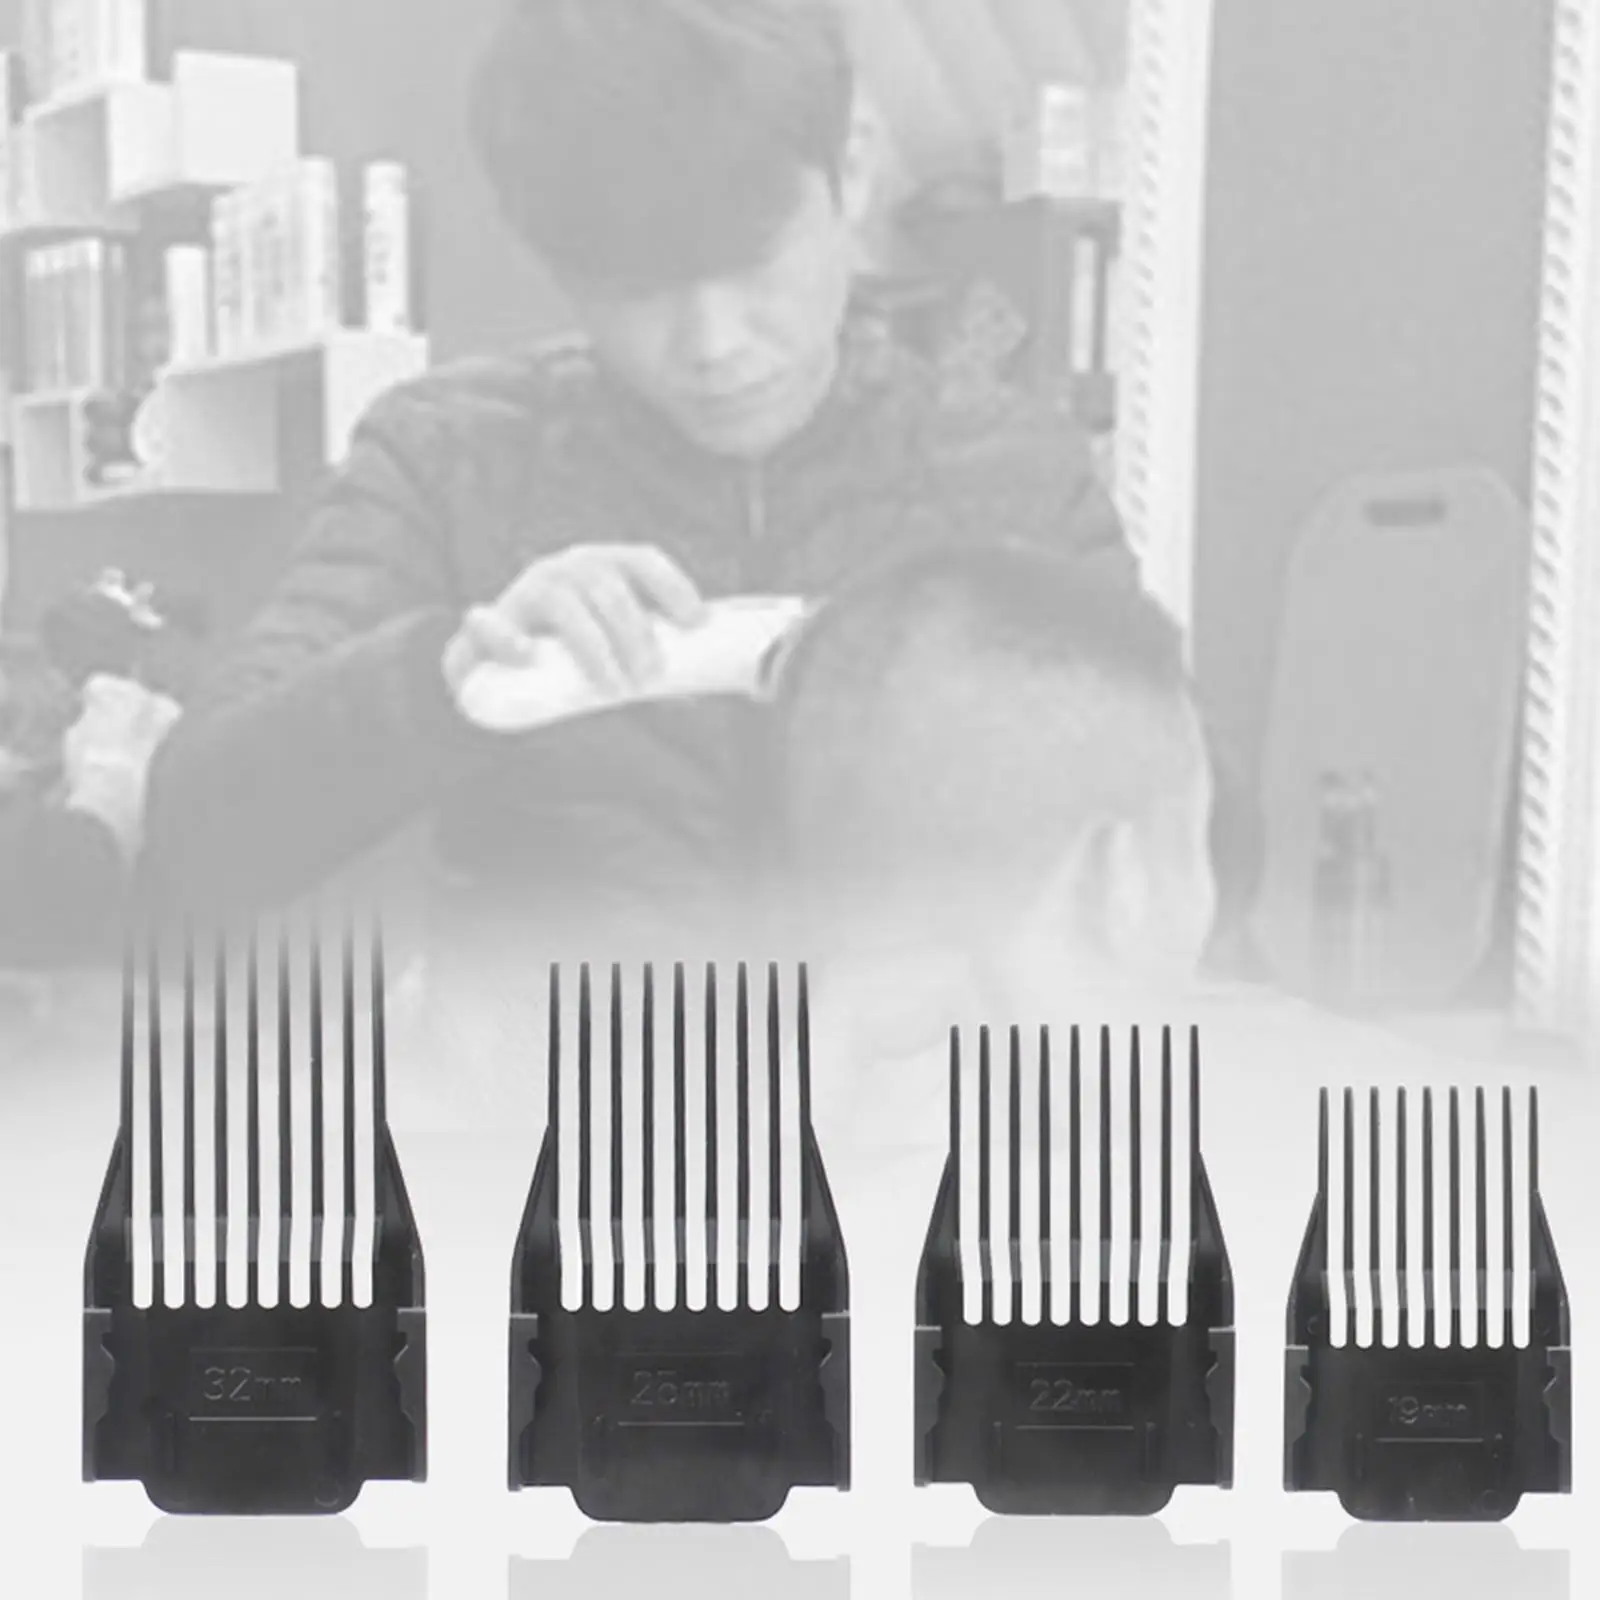 4 Pieces Hair Trimmer Guard Combs Hair Clipper Guard Combs Hair Clippers Cutting Attachment for Most Size Hair Clippers/Trimmers